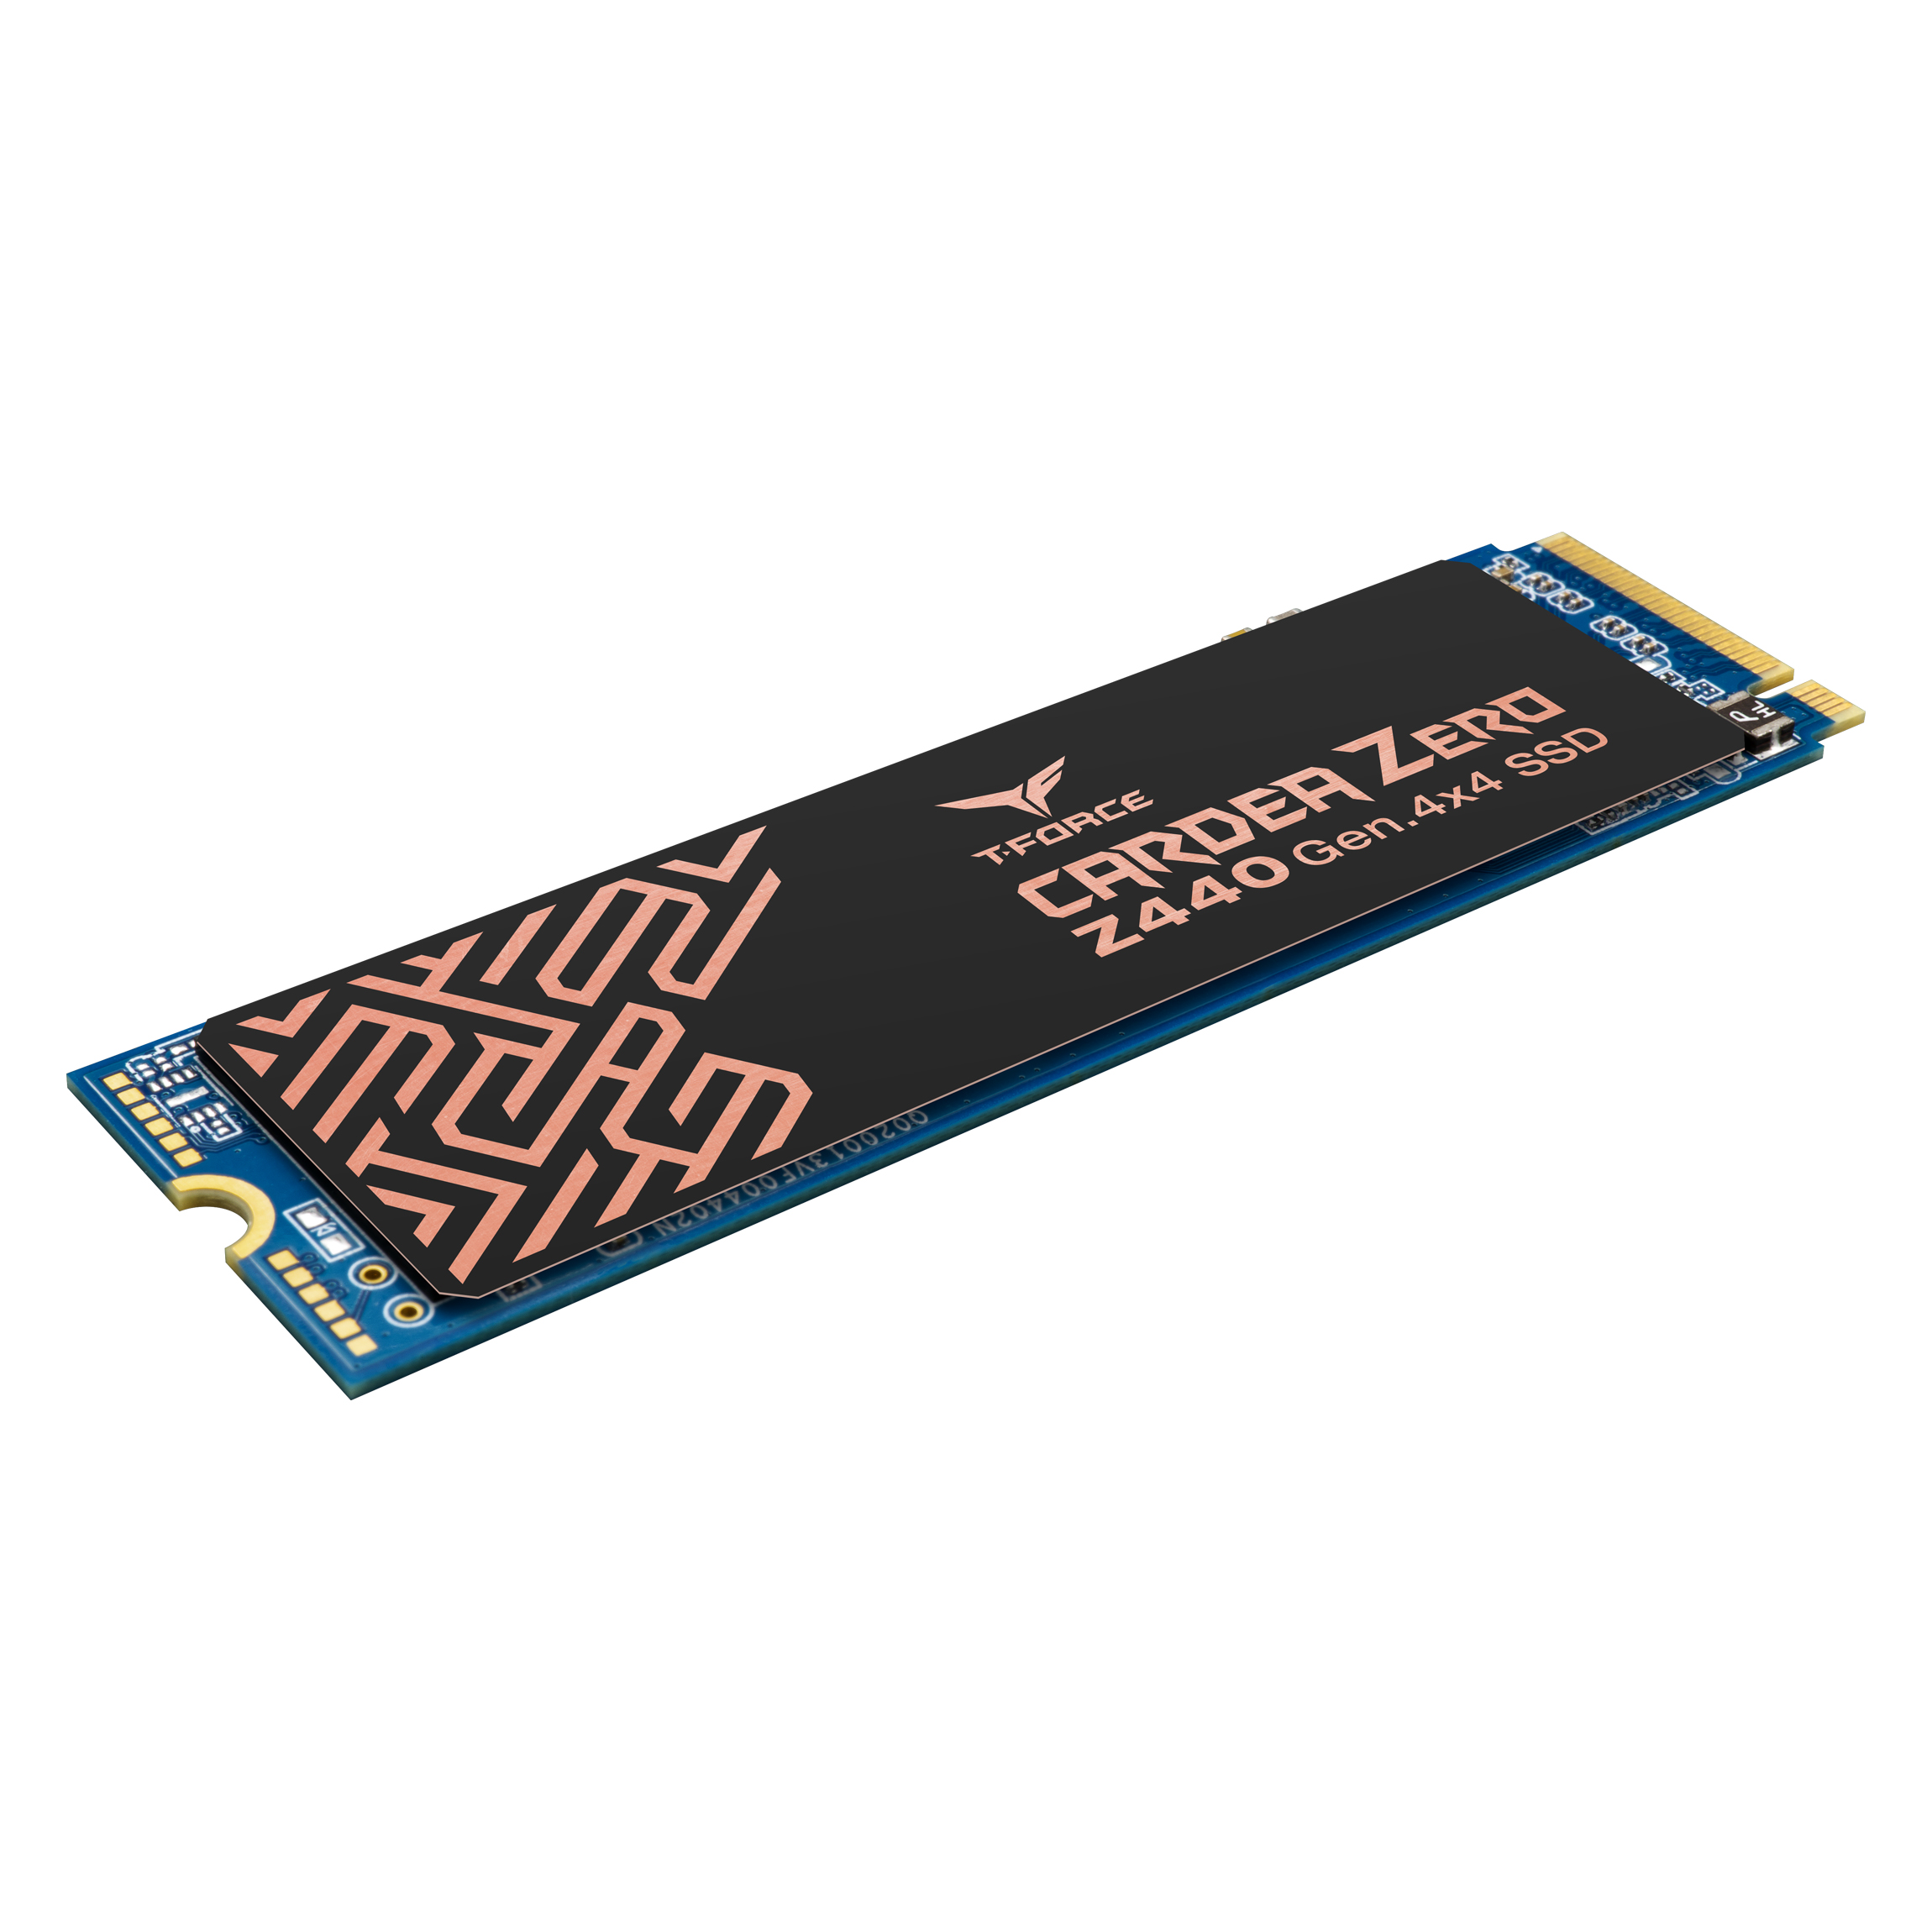 Team Group - TeamGroup T-Force Cardea Zero Z440 2TB NVMe PCIe Gen4 M.2 Solid State Drive